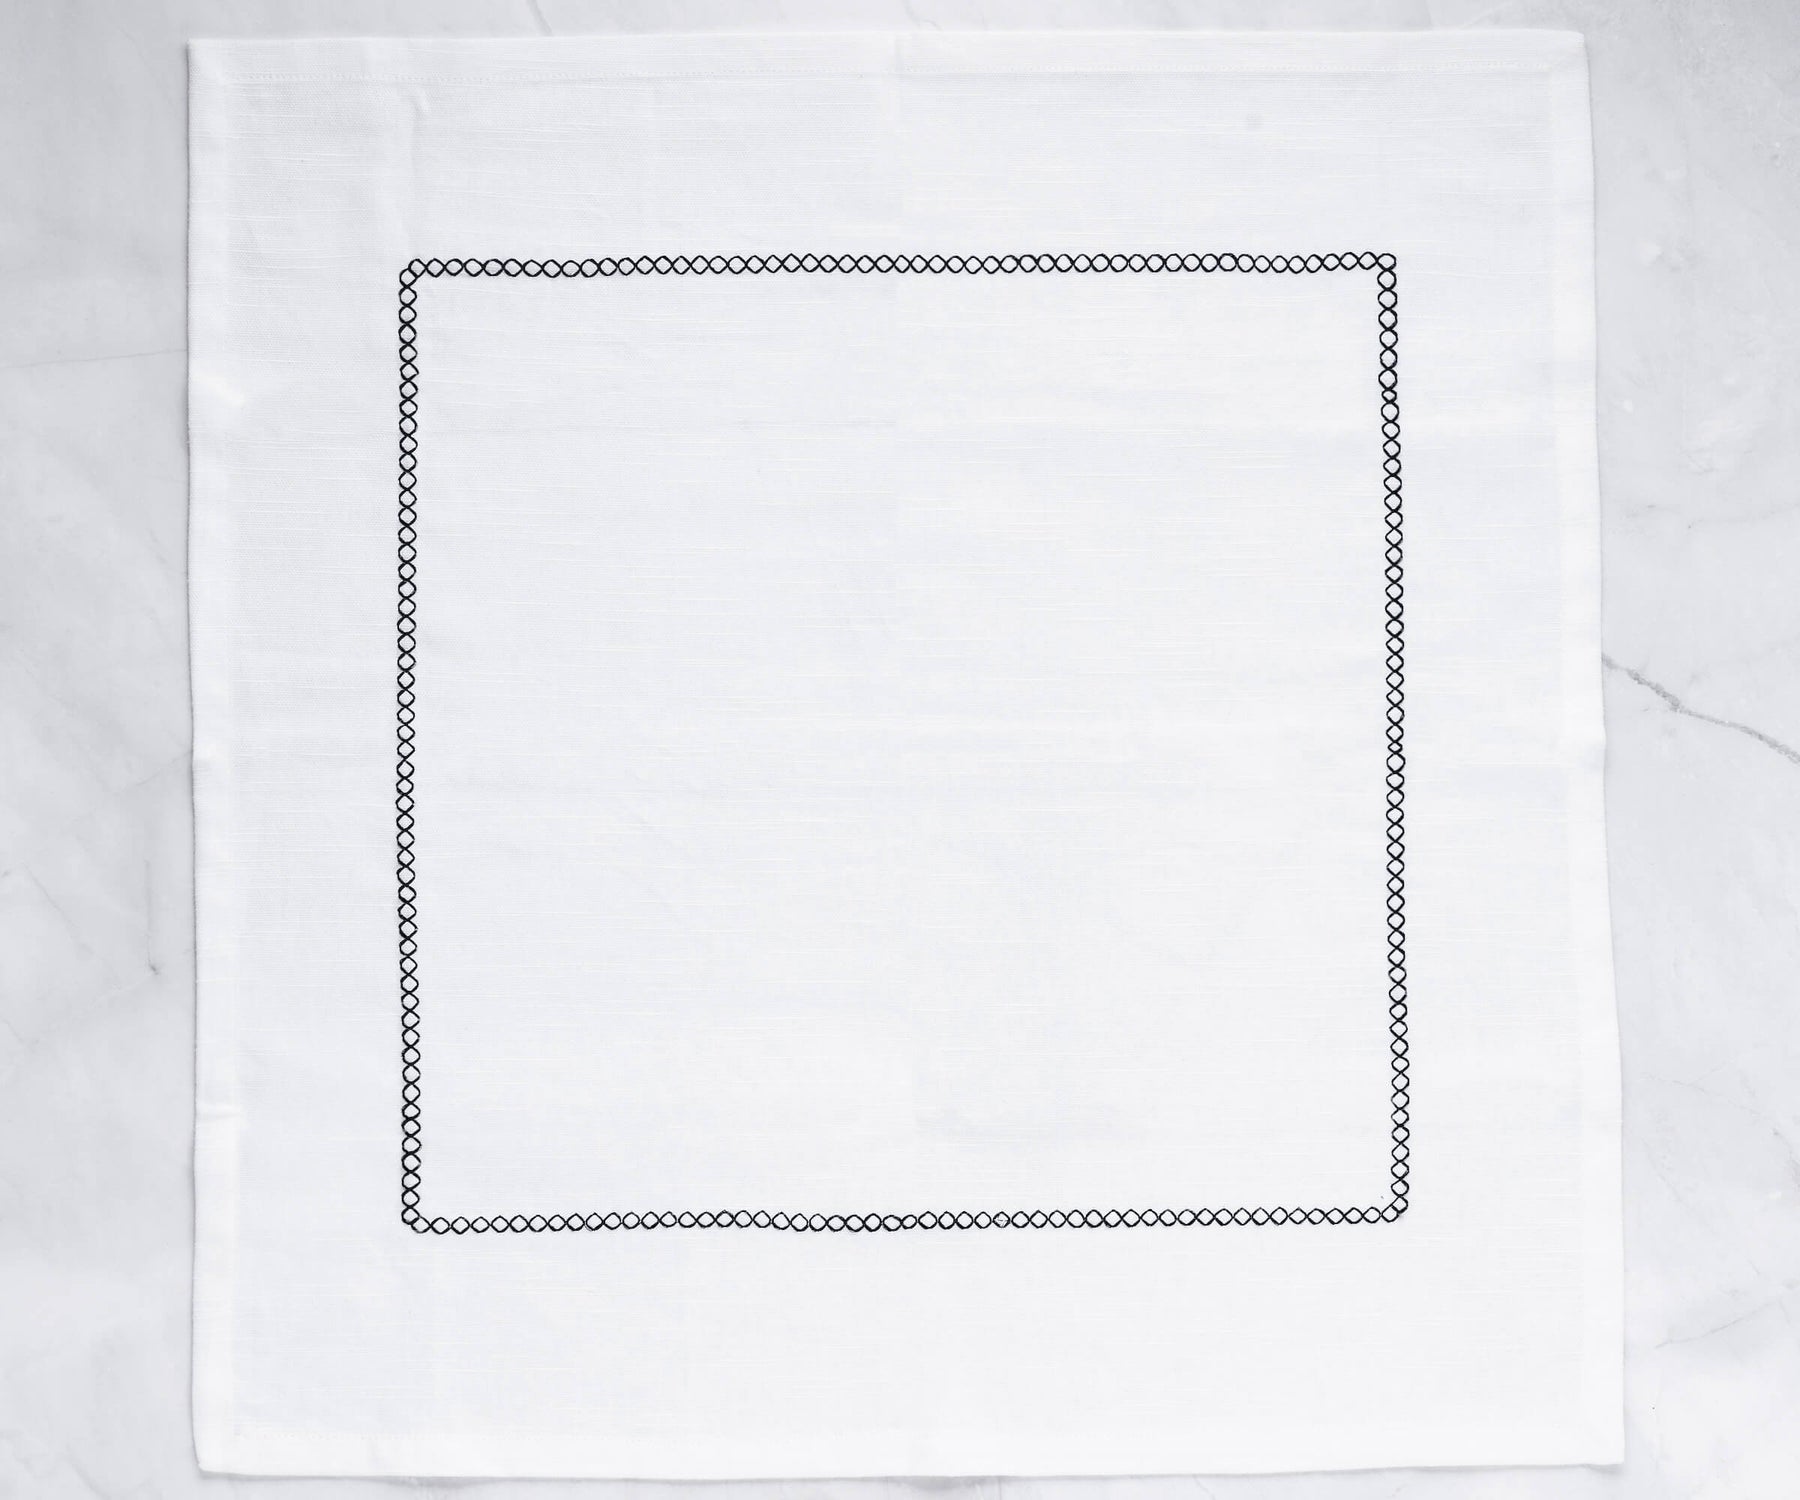 Cotton napkins, information on dinner napkin size, cotton dinner napkins, wedding dinner napkins, and various dinner napkin folds are all aspects to consider.